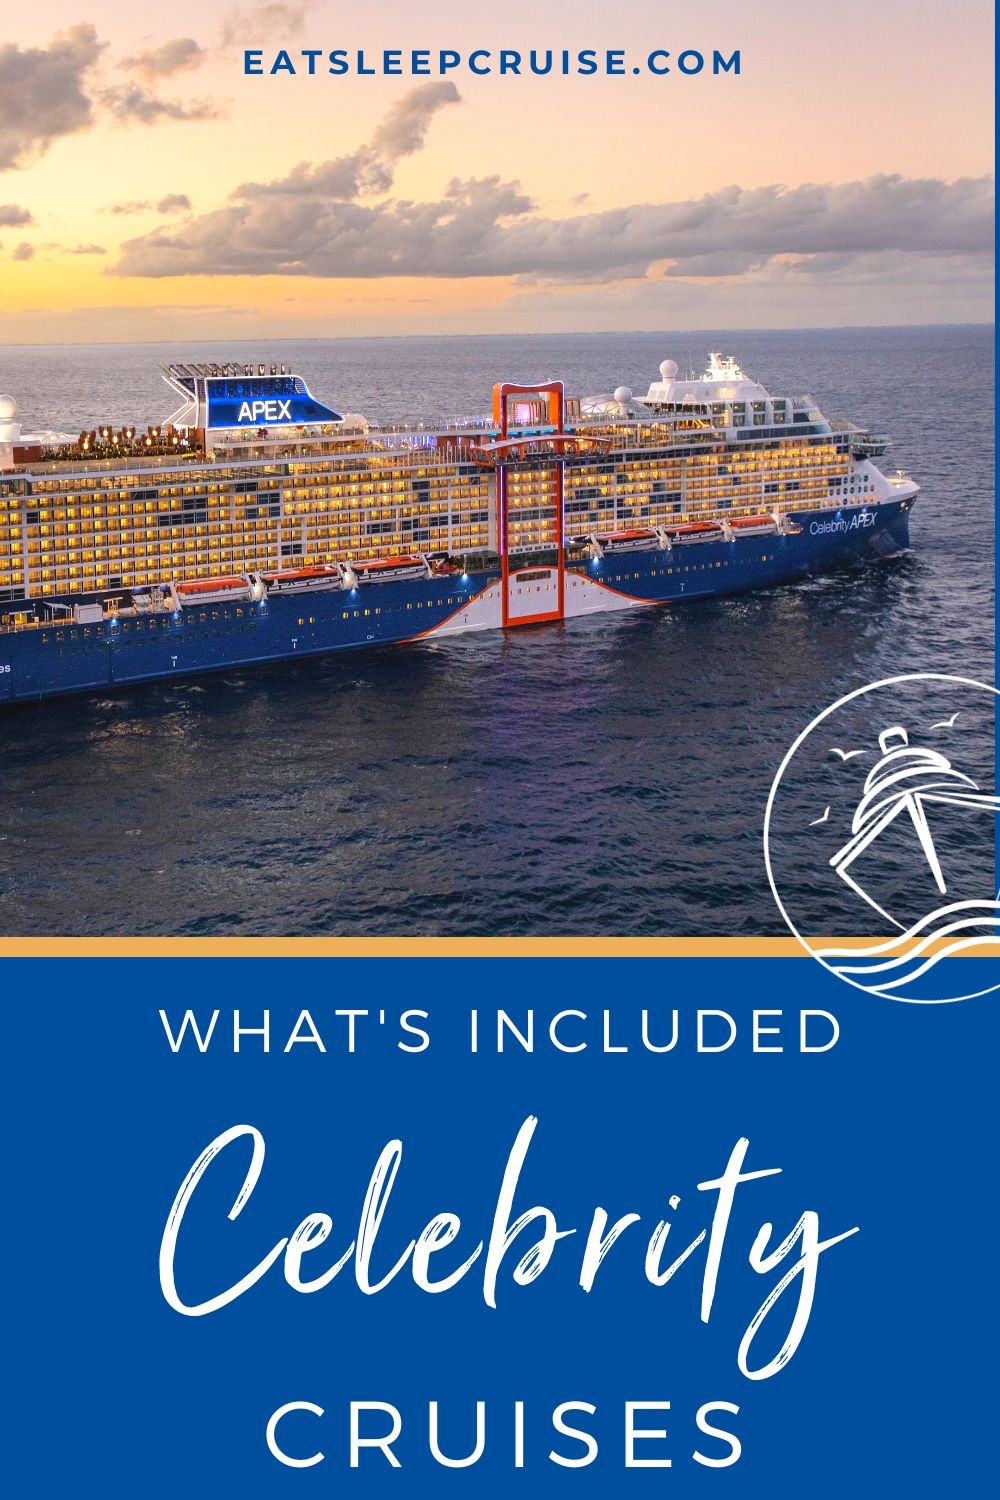 What's Included in a Celebrity Cruise?